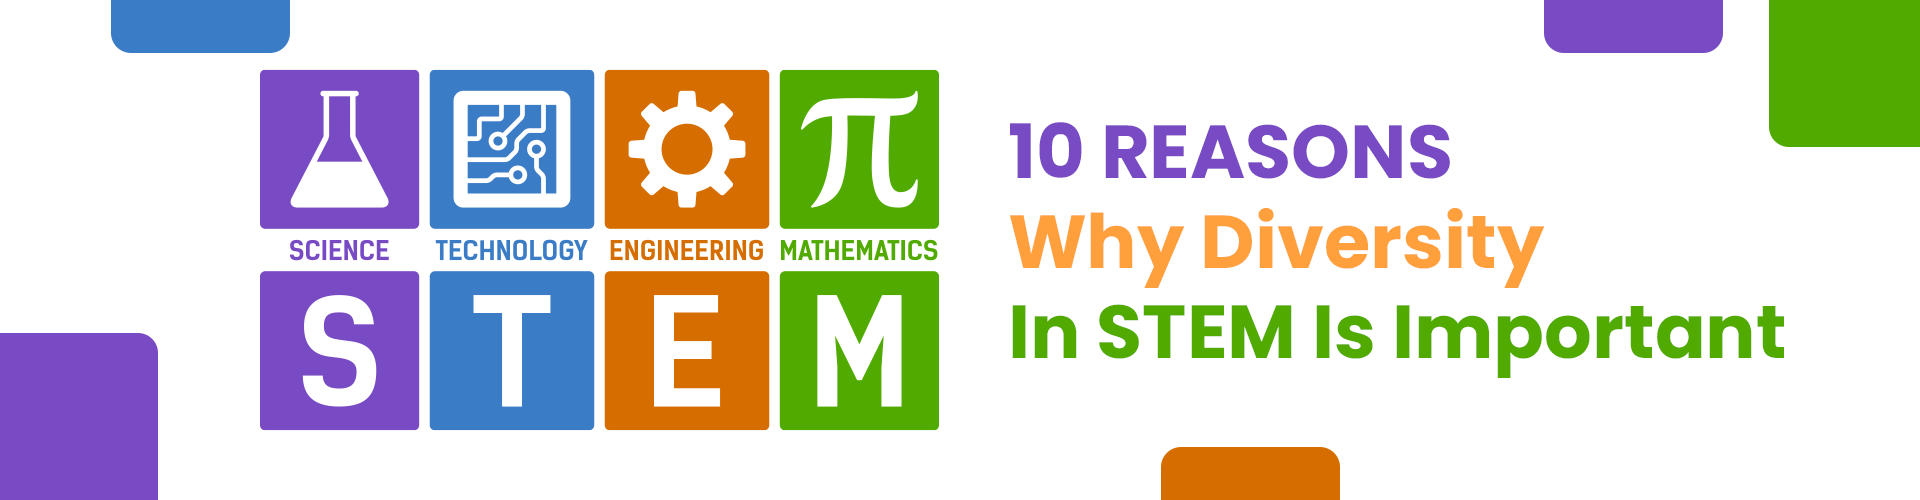 10 Reasons Why Diversity In Stem Is Important 1